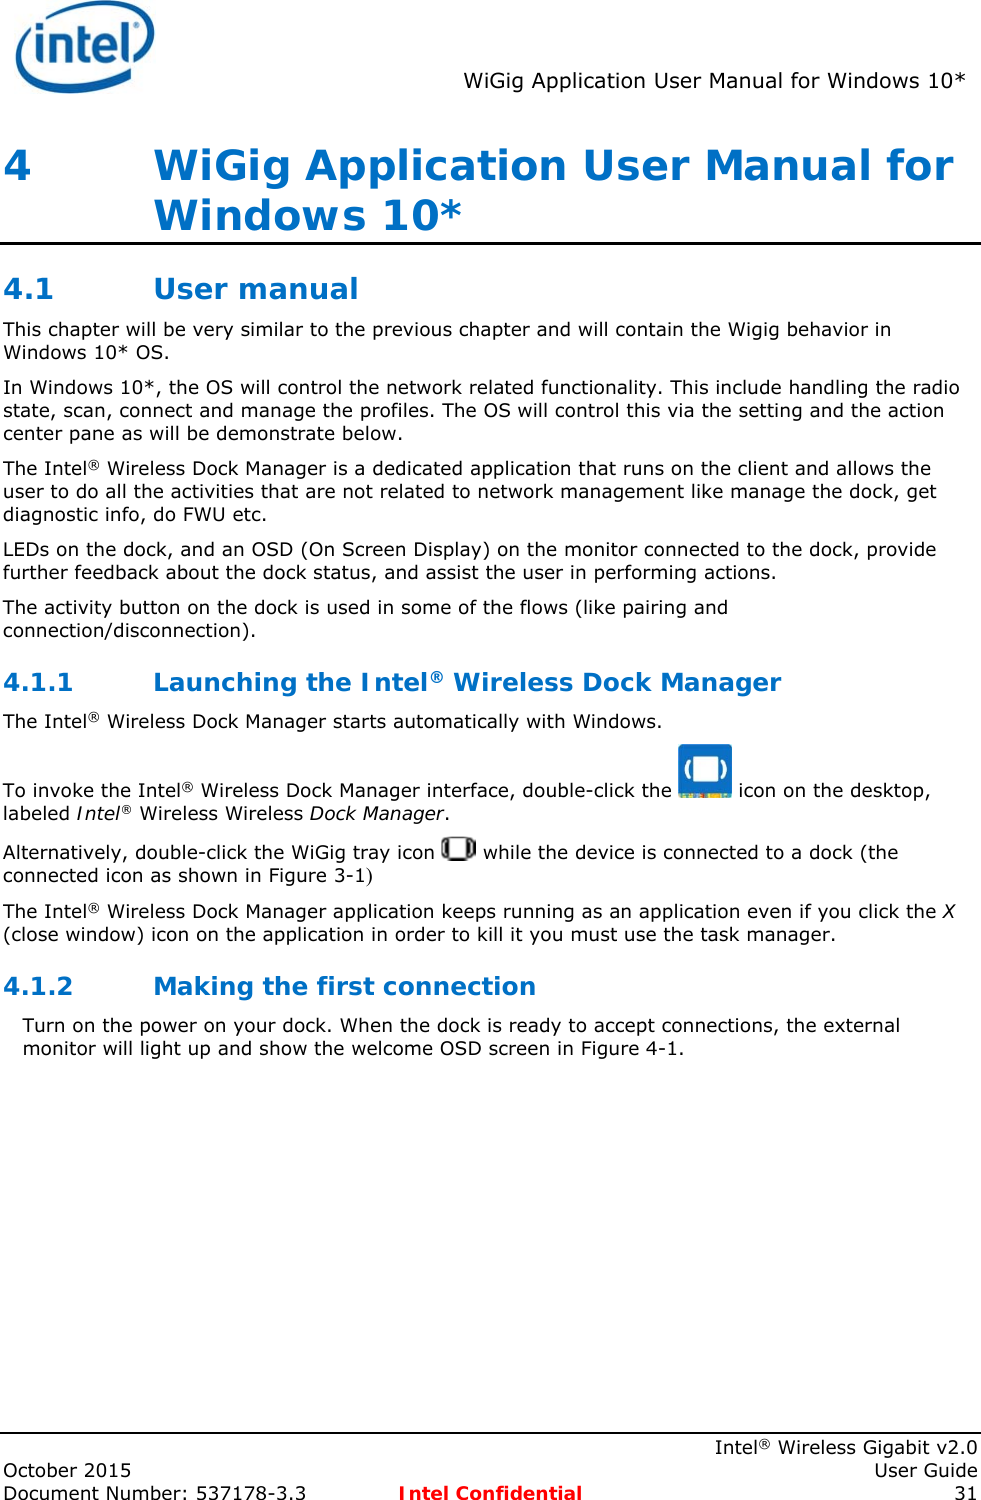  WiGig Application User Manual for Windows 10*    Intel® Wireless Gigabit v2.0 October 2015    User Guide Document Number: 537178-3.3  Intel Confidential 31 4   WiGig Application User Manual for Windows 10* 4.1 User manual This chapter will be very similar to the previous chapter and will contain the Wigig behavior in Windows 10* OS.  In Windows 10*, the OS will control the network related functionality. This include handling the radio state, scan, connect and manage the profiles. The OS will control this via the setting and the action center pane as will be demonstrate below. The Intel® Wireless Dock Manager is a dedicated application that runs on the client and allows the user to do all the activities that are not related to network management like manage the dock, get diagnostic info, do FWU etc. LEDs on the dock, and an OSD (On Screen Display) on the monitor connected to the dock, provide further feedback about the dock status, and assist the user in performing actions. The activity button on the dock is used in some of the flows (like pairing and connection/disconnection). 4.1.1 Launching the Intel® Wireless Dock Manager The Intel® Wireless Dock Manager starts automatically with Windows. To invoke the Intel® Wireless Dock Manager interface, double-click the   icon on the desktop, labeled Intel® Wireless Wireless Dock Manager. Alternatively, double-click the WiGig tray icon   while the device is connected to a dock (the connected icon as shown in Figure 3-1) The Intel® Wireless Dock Manager application keeps running as an application even if you click the X (close window) icon on the application in order to kill it you must use the task manager. 4.1.2 Making the first connection Turn on the power on your dock. When the dock is ready to accept connections, the external monitor will light up and show the welcome OSD screen in Figure 4-1. 